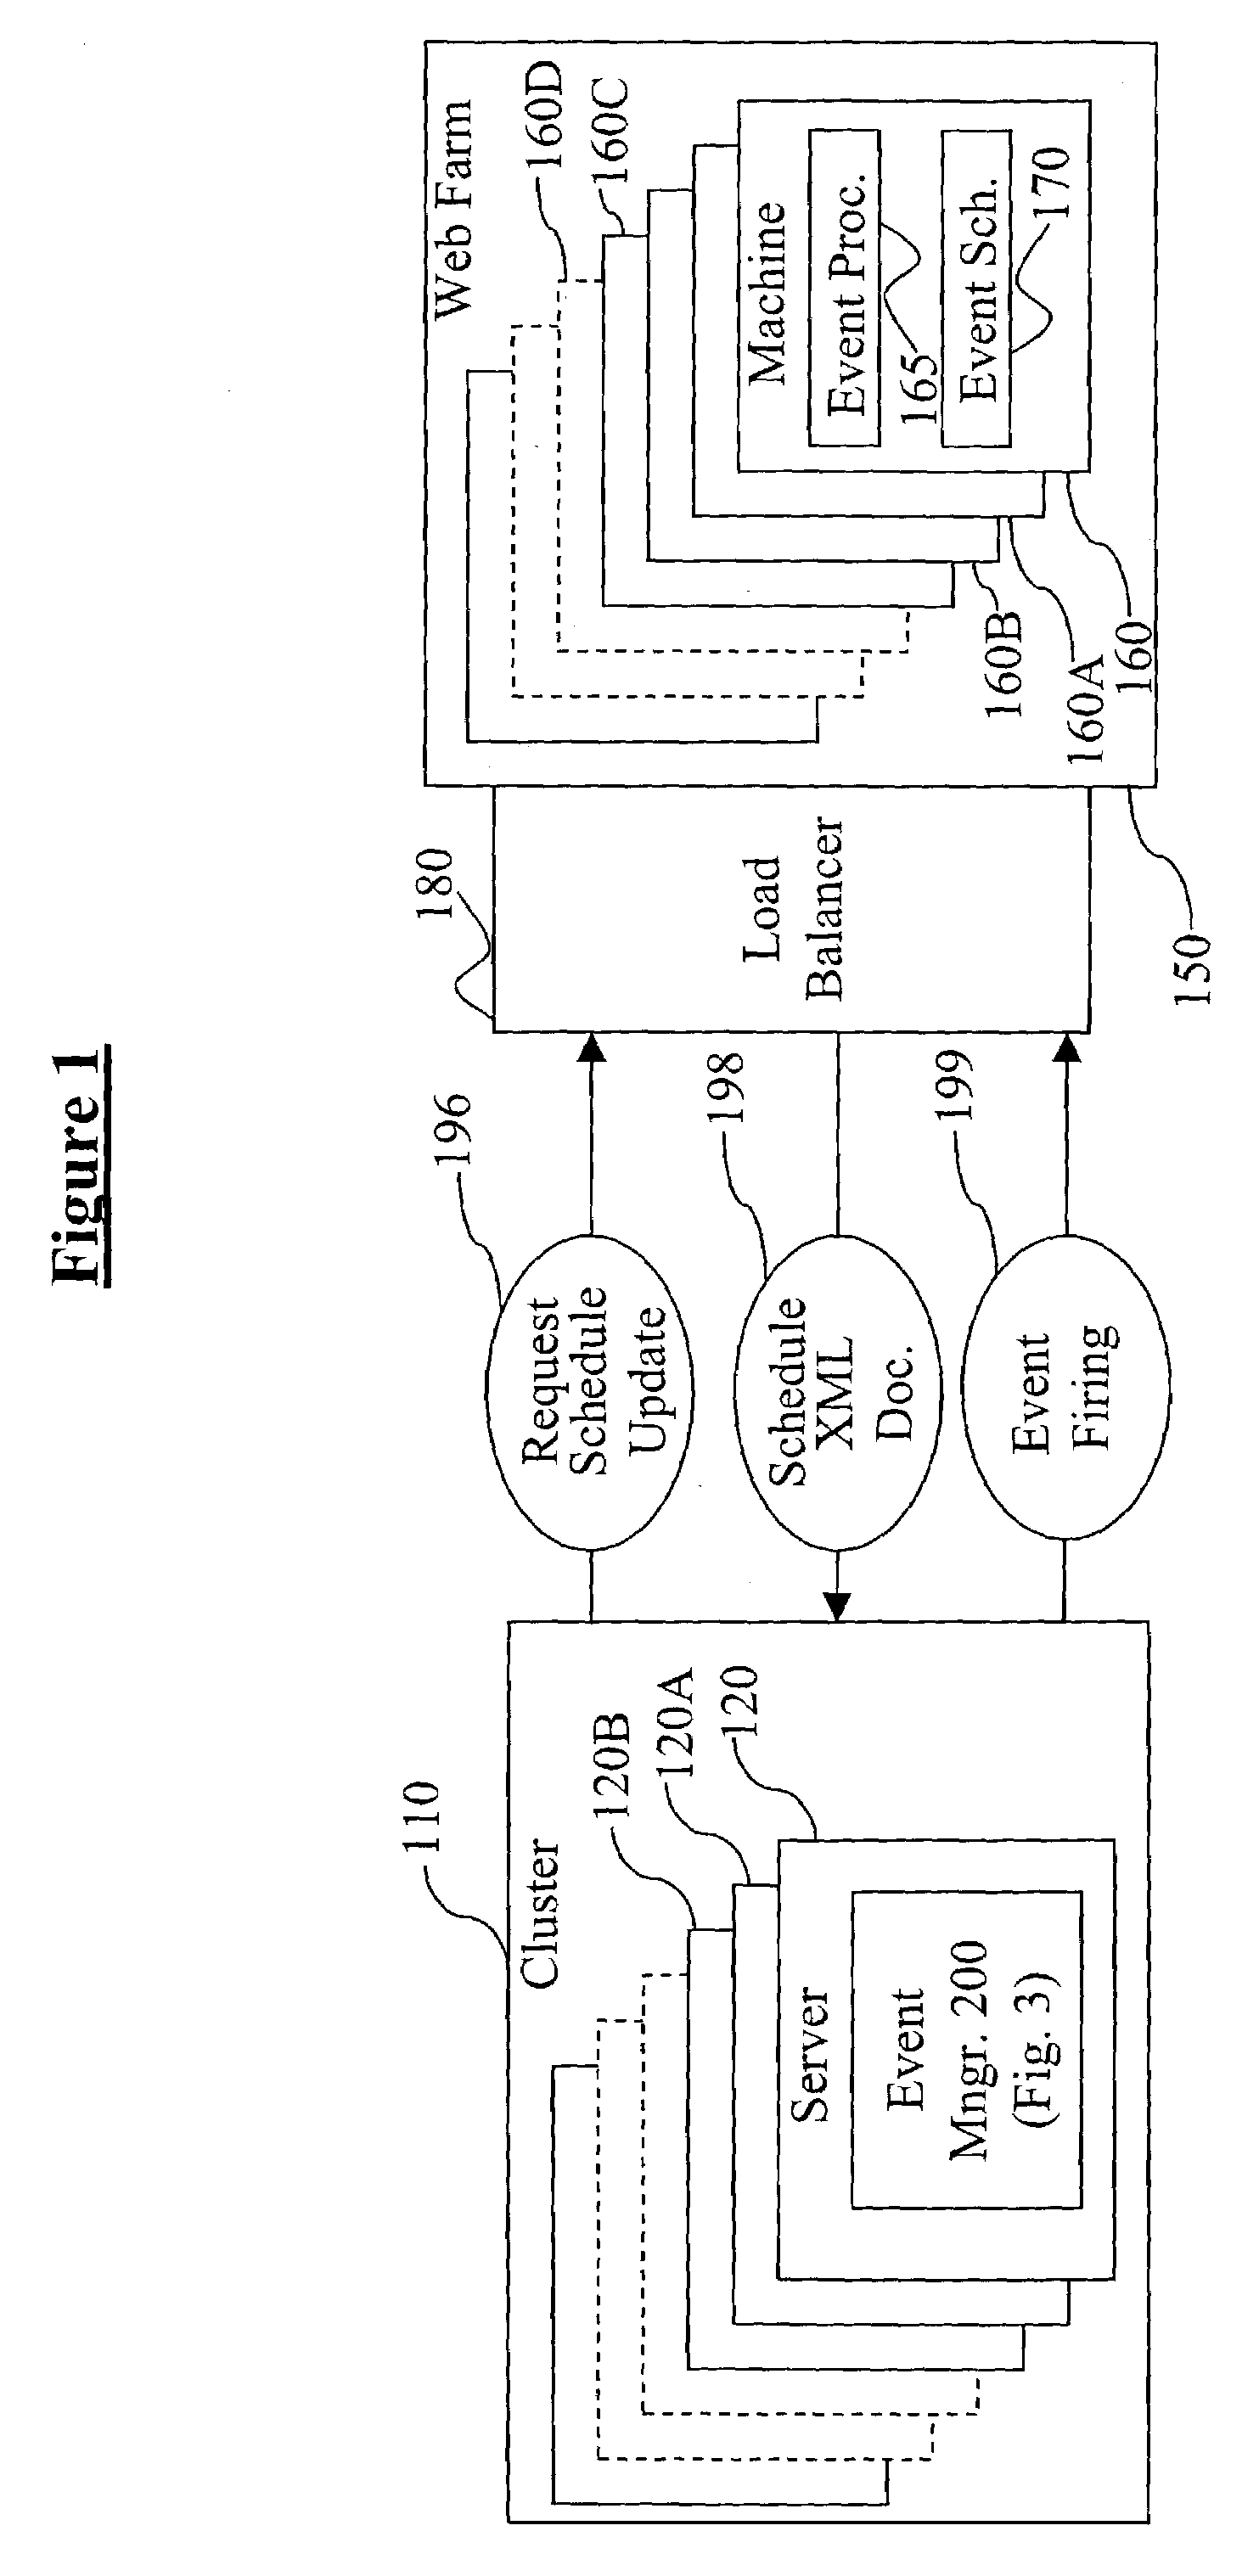 Method and apparatus and program for scheduling and executing events in real time over a network